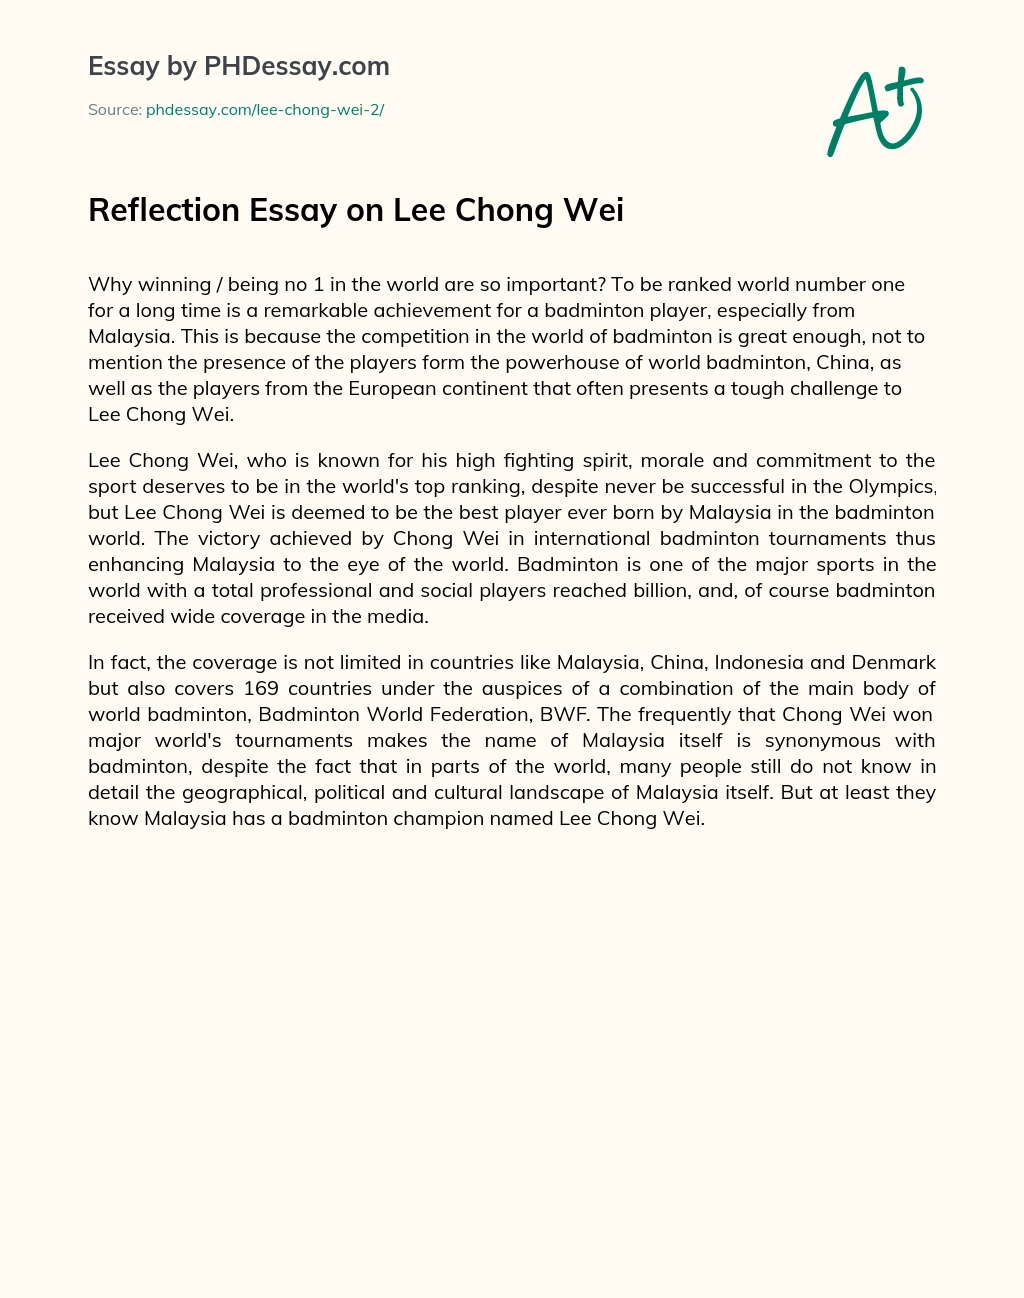 Reflection Essay on Lee Chong Wei essay